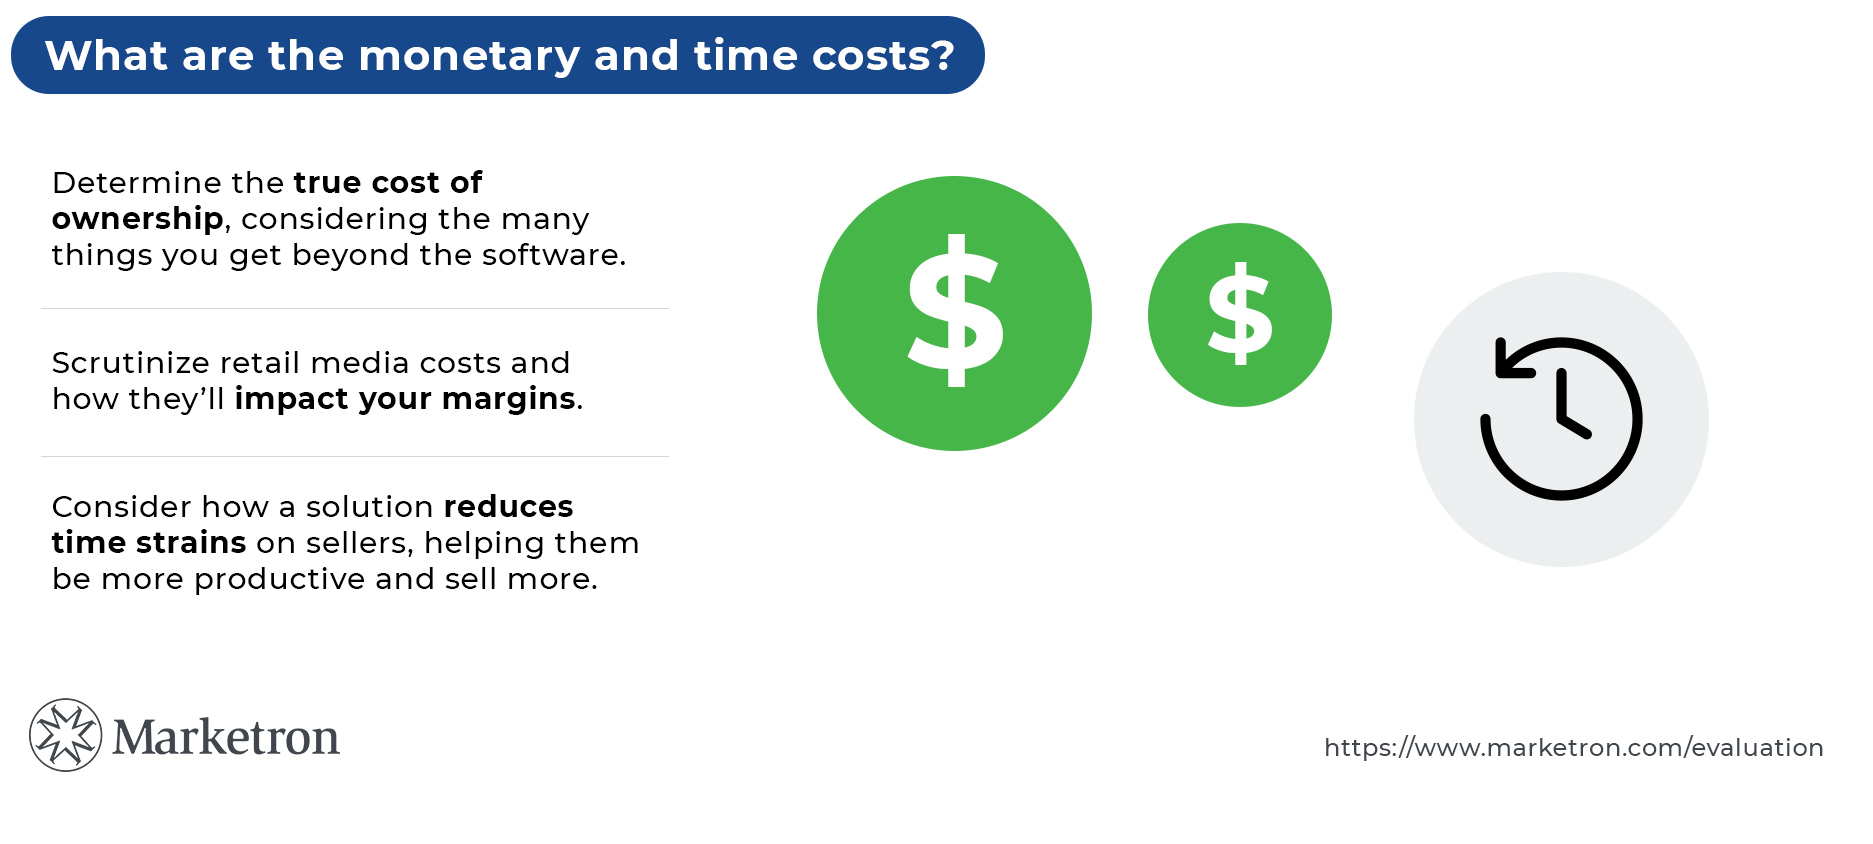 What are the monetary and time costs?